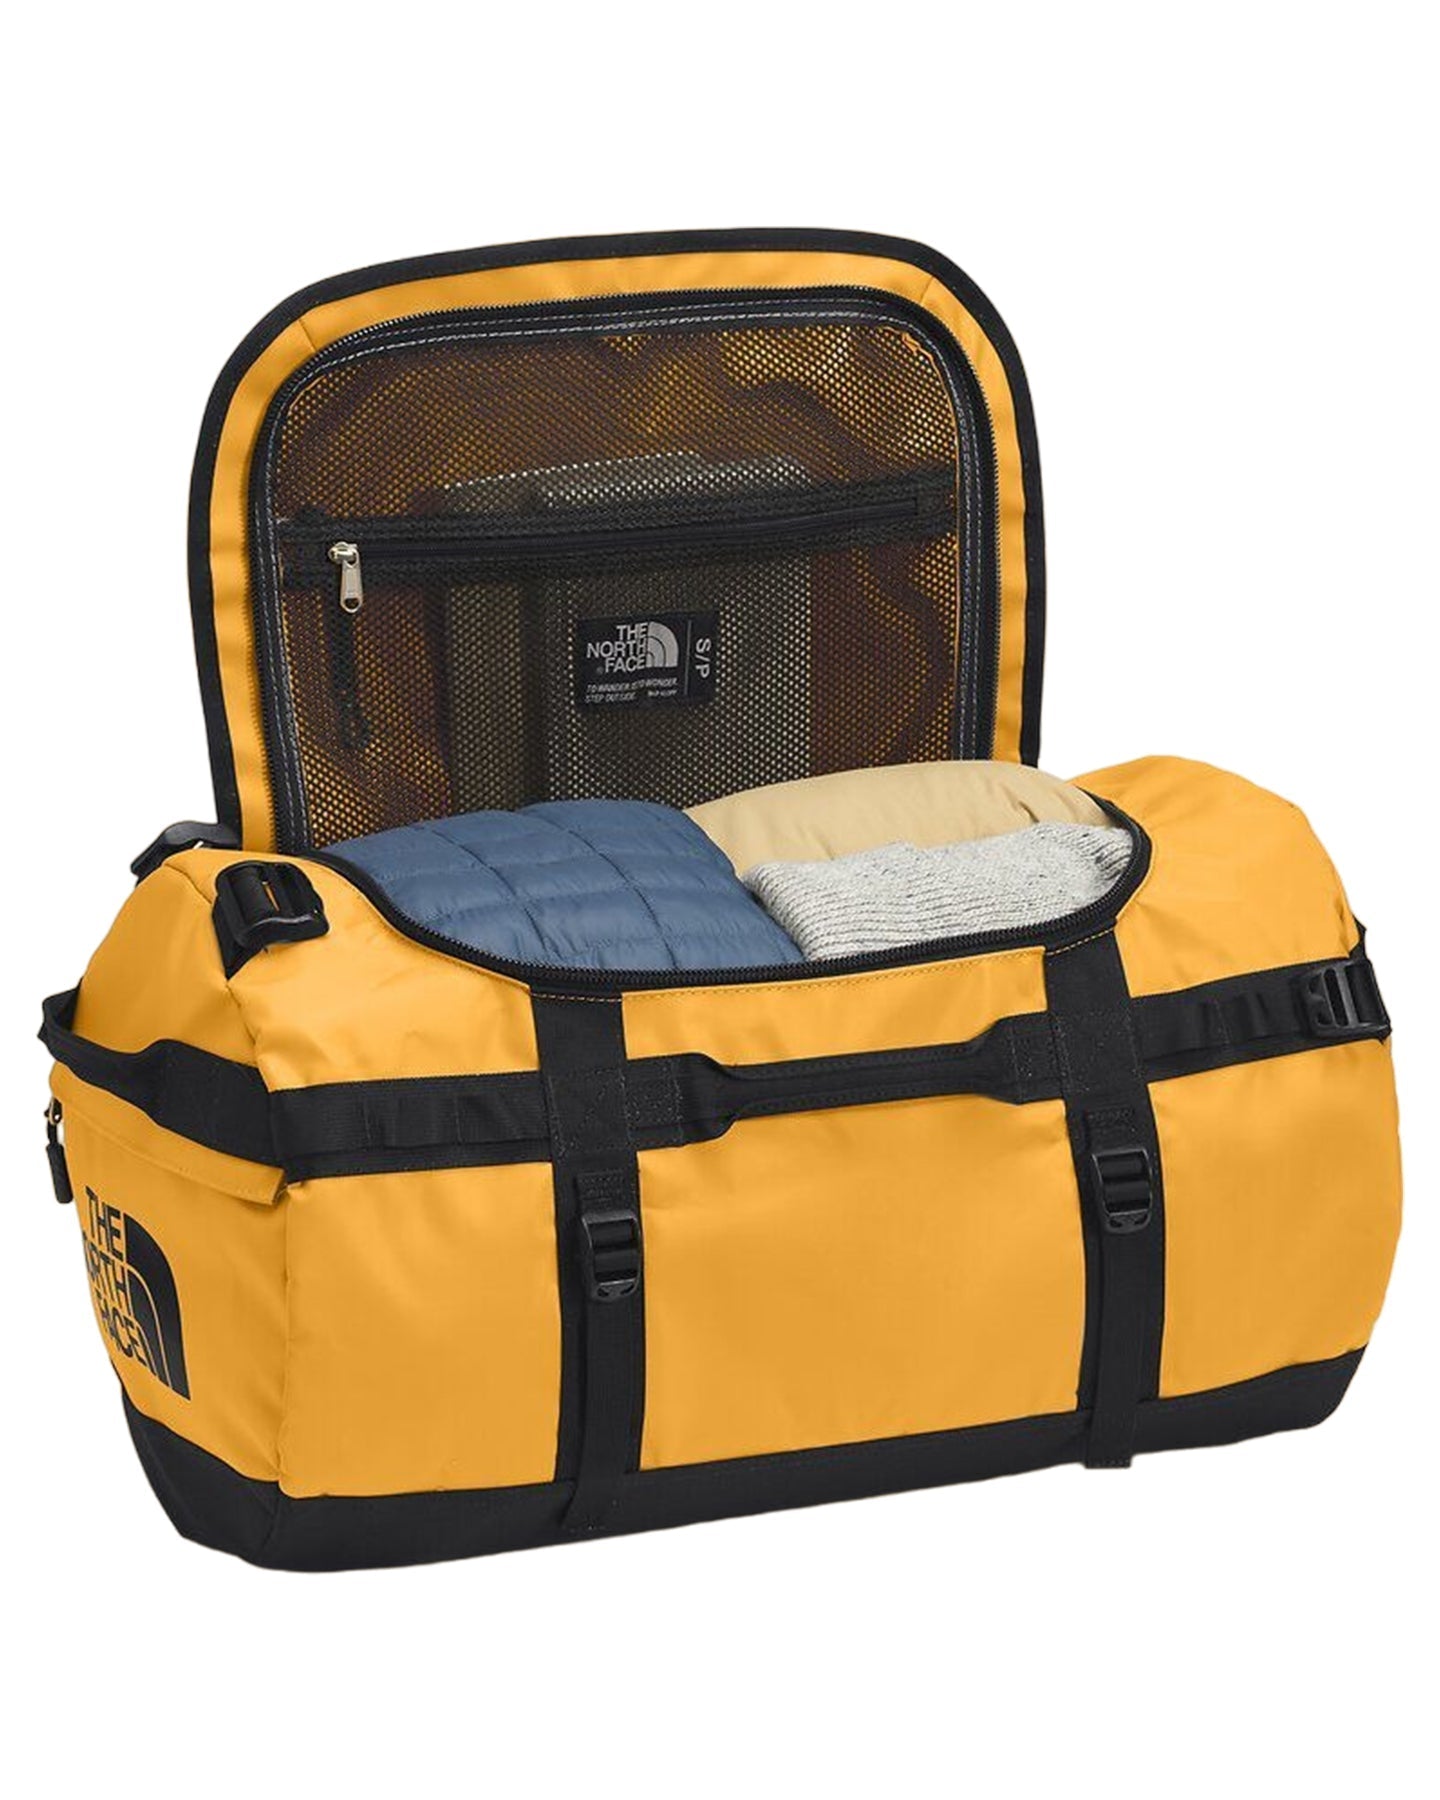 The North Face Base Camp Duffel S - Summit Gold/Tnf Black Luggage Bags - SnowSkiersWarehouse